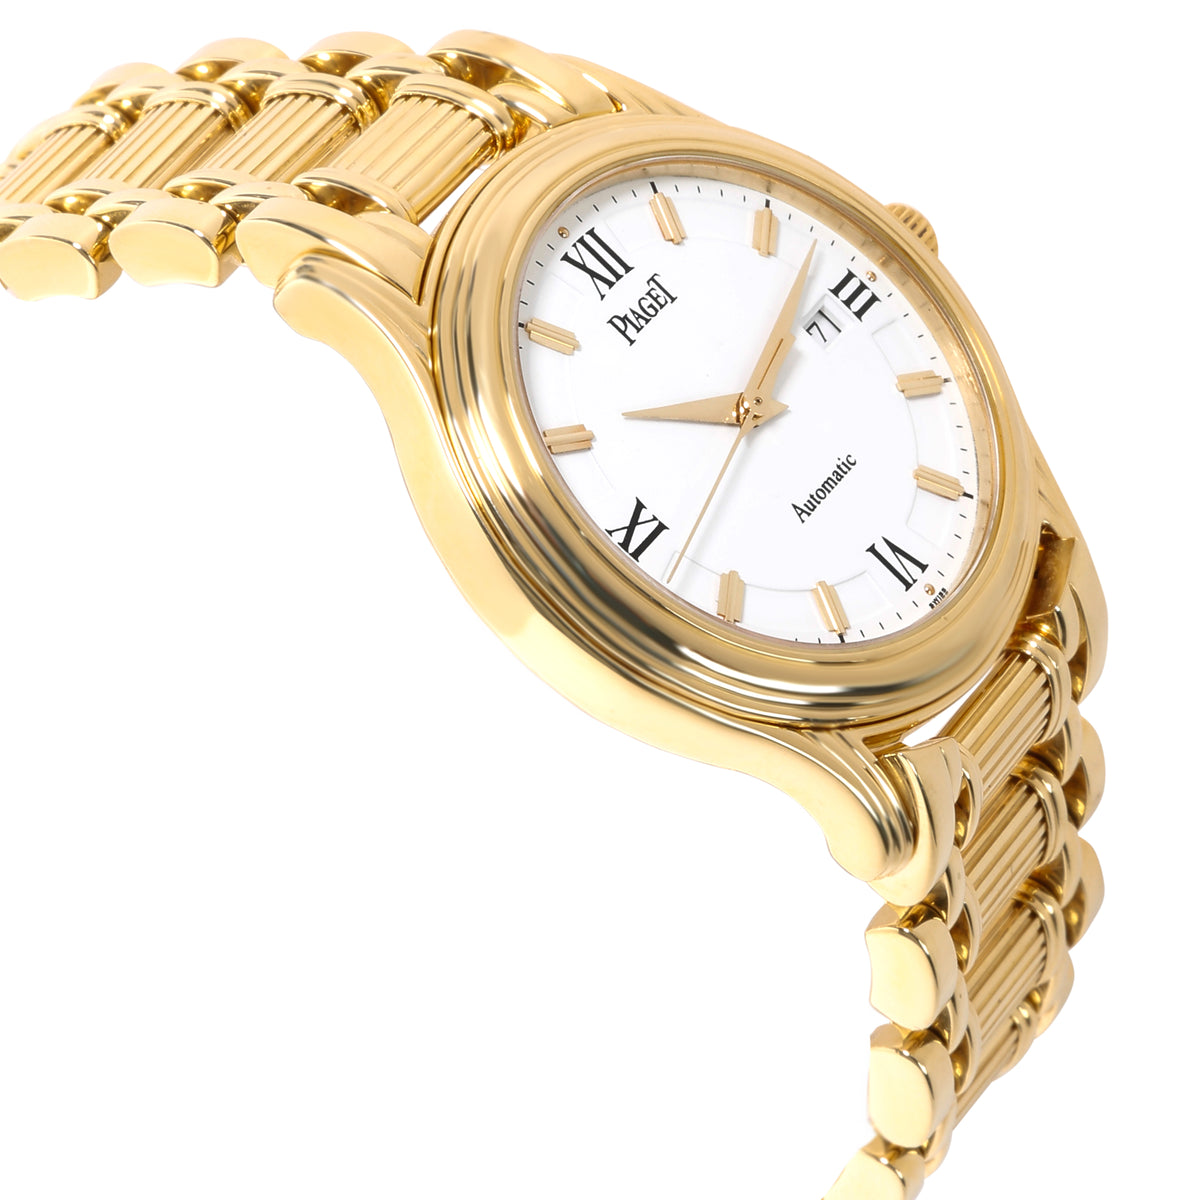 Piaget Polo 24001 M 501 D Unisex Watch in 18kt Yellow Gold